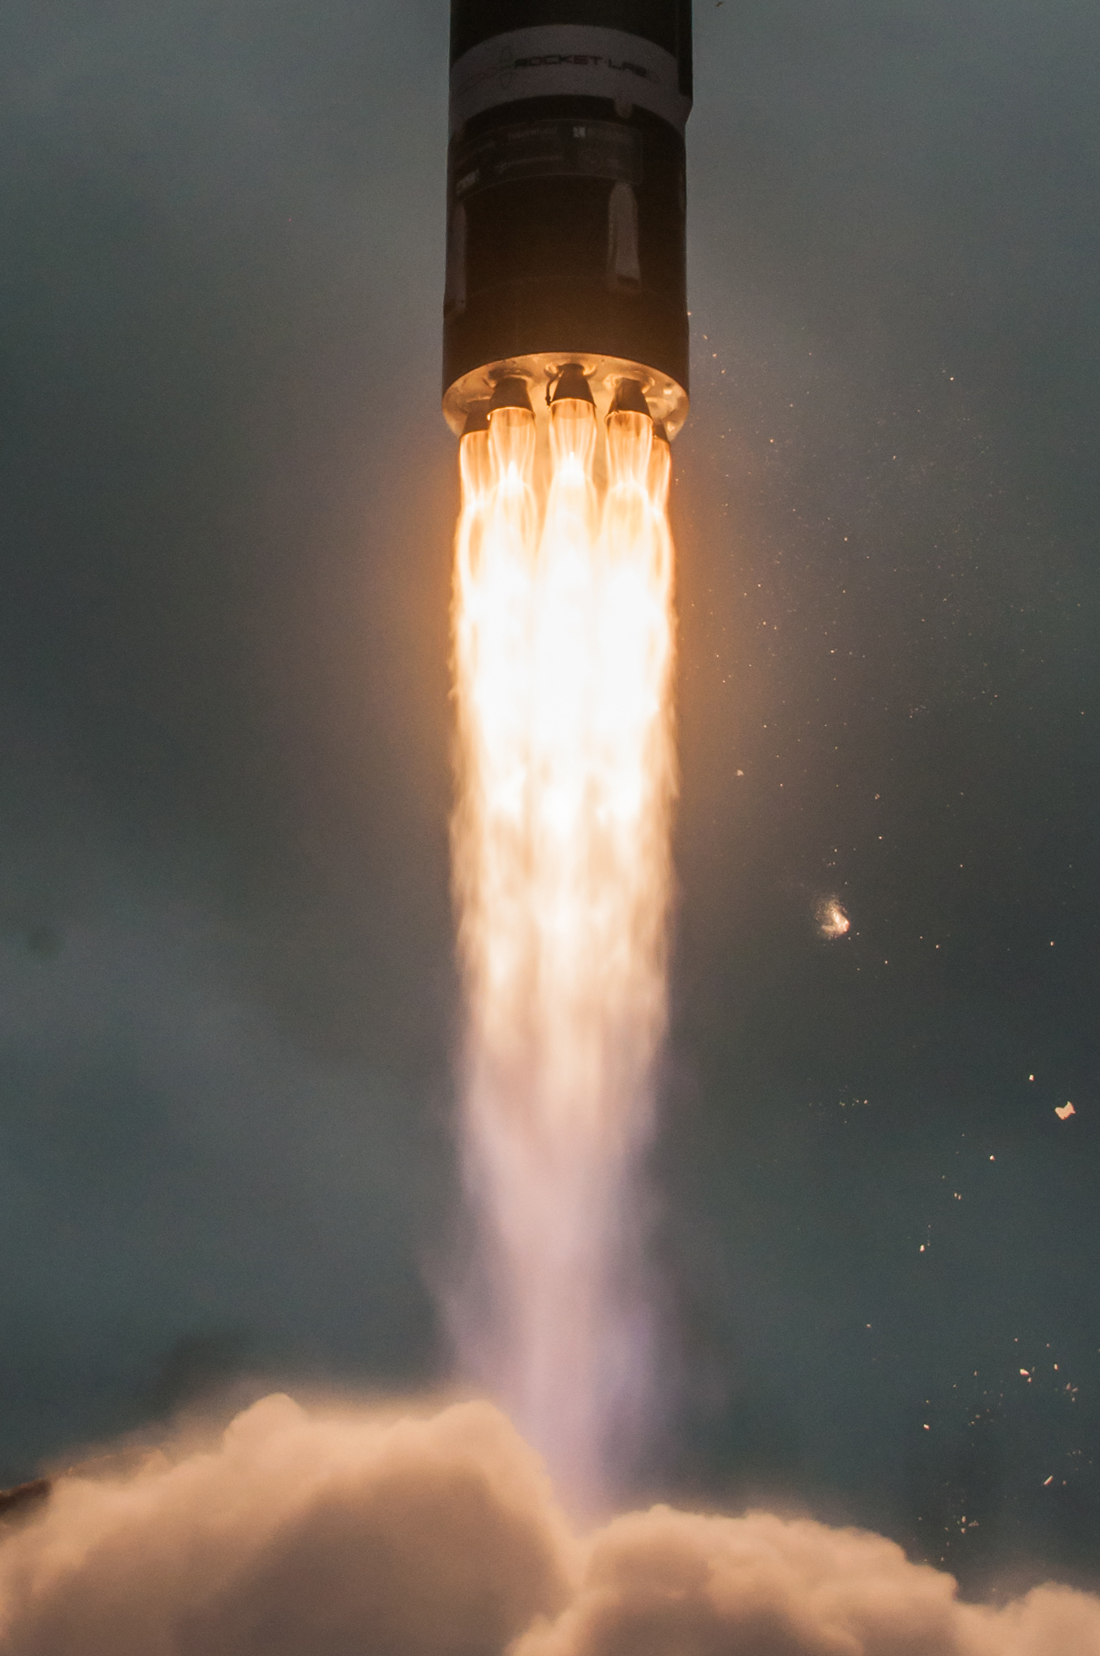 Lift-off of the R3D2 mission, Image credit: Simon Moffatt and Sam Toms